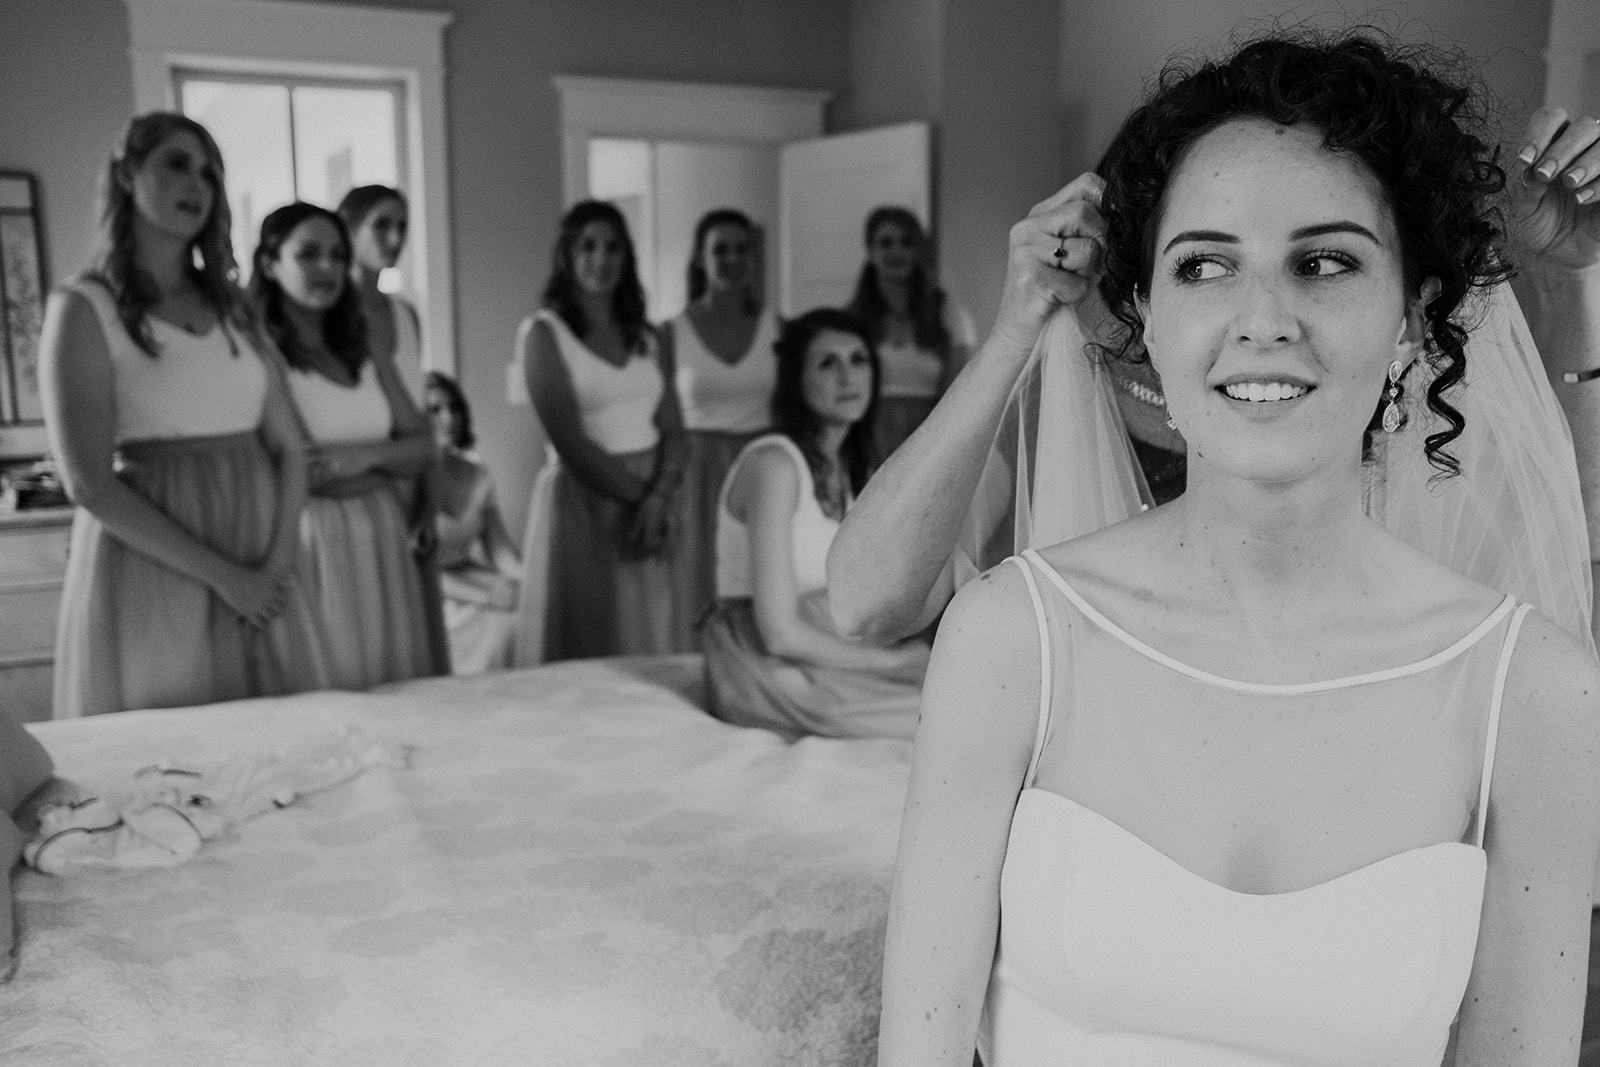 Bridesmaids look on while a bride gets her veil put in place before her outdoor wedding ceremony at Blue Hill Farm in Waterford, VA.